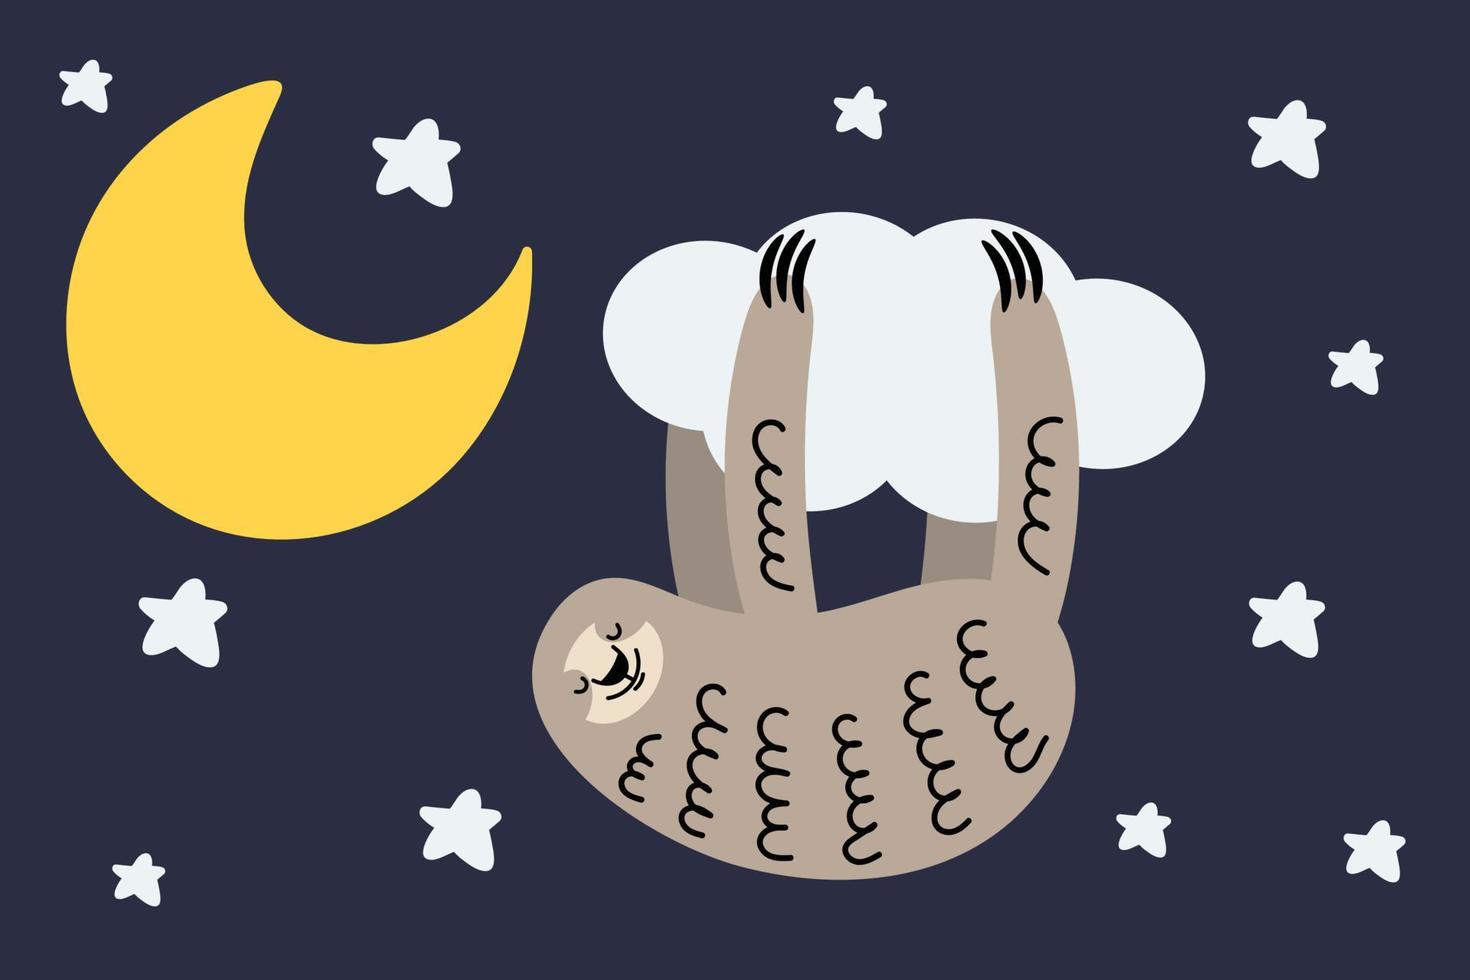 Cute cartoon lazy sloth hanging on a cloud with stars and crescent moon. Vector sloth illustration.